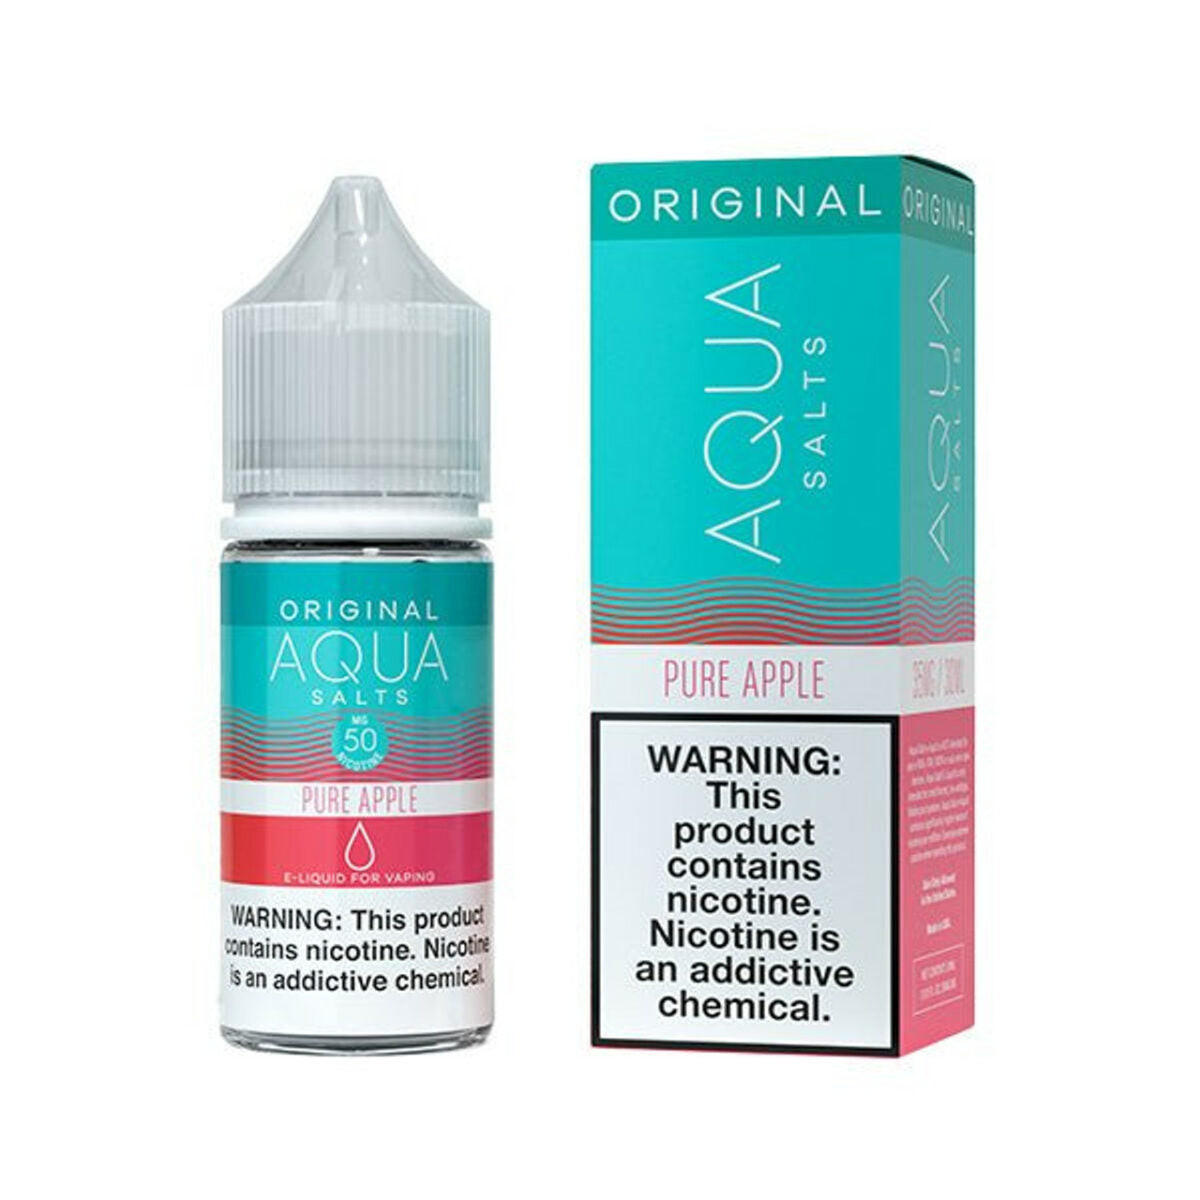 Pure Apple by Aqua Salts Series 30mL with Packaging